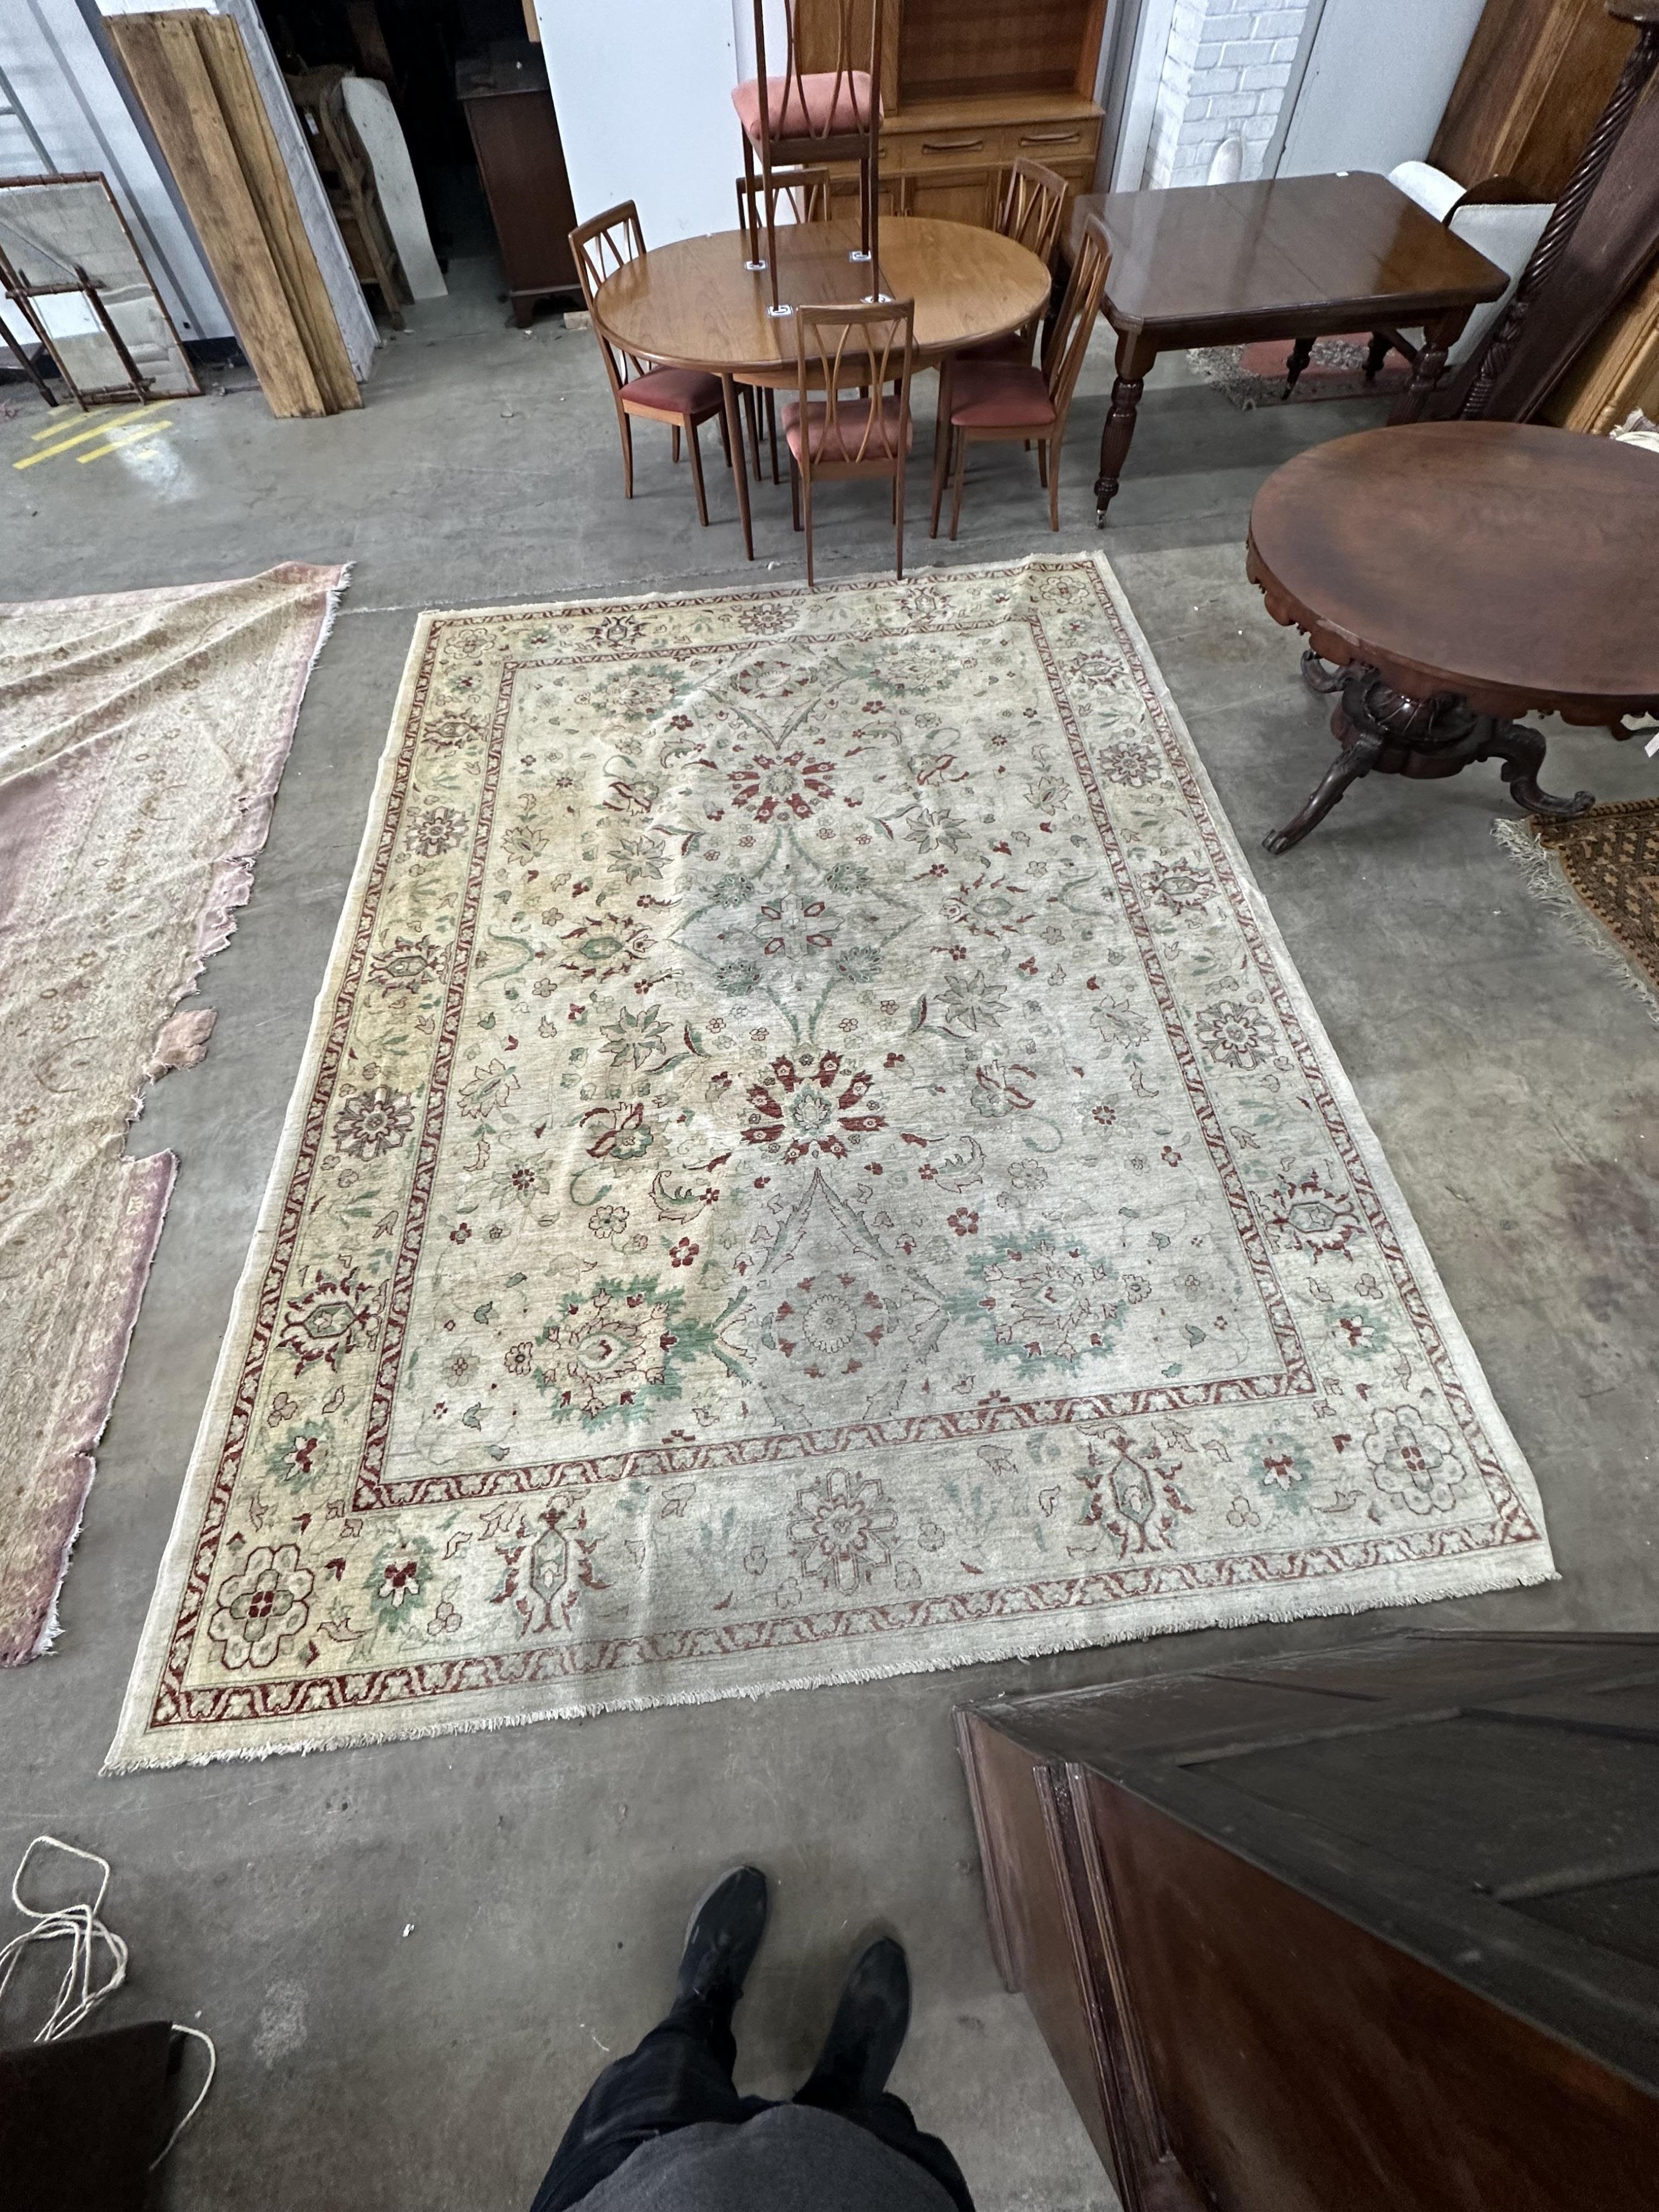 An Indian carpet, approximately 380 x 280cm. Condition - good